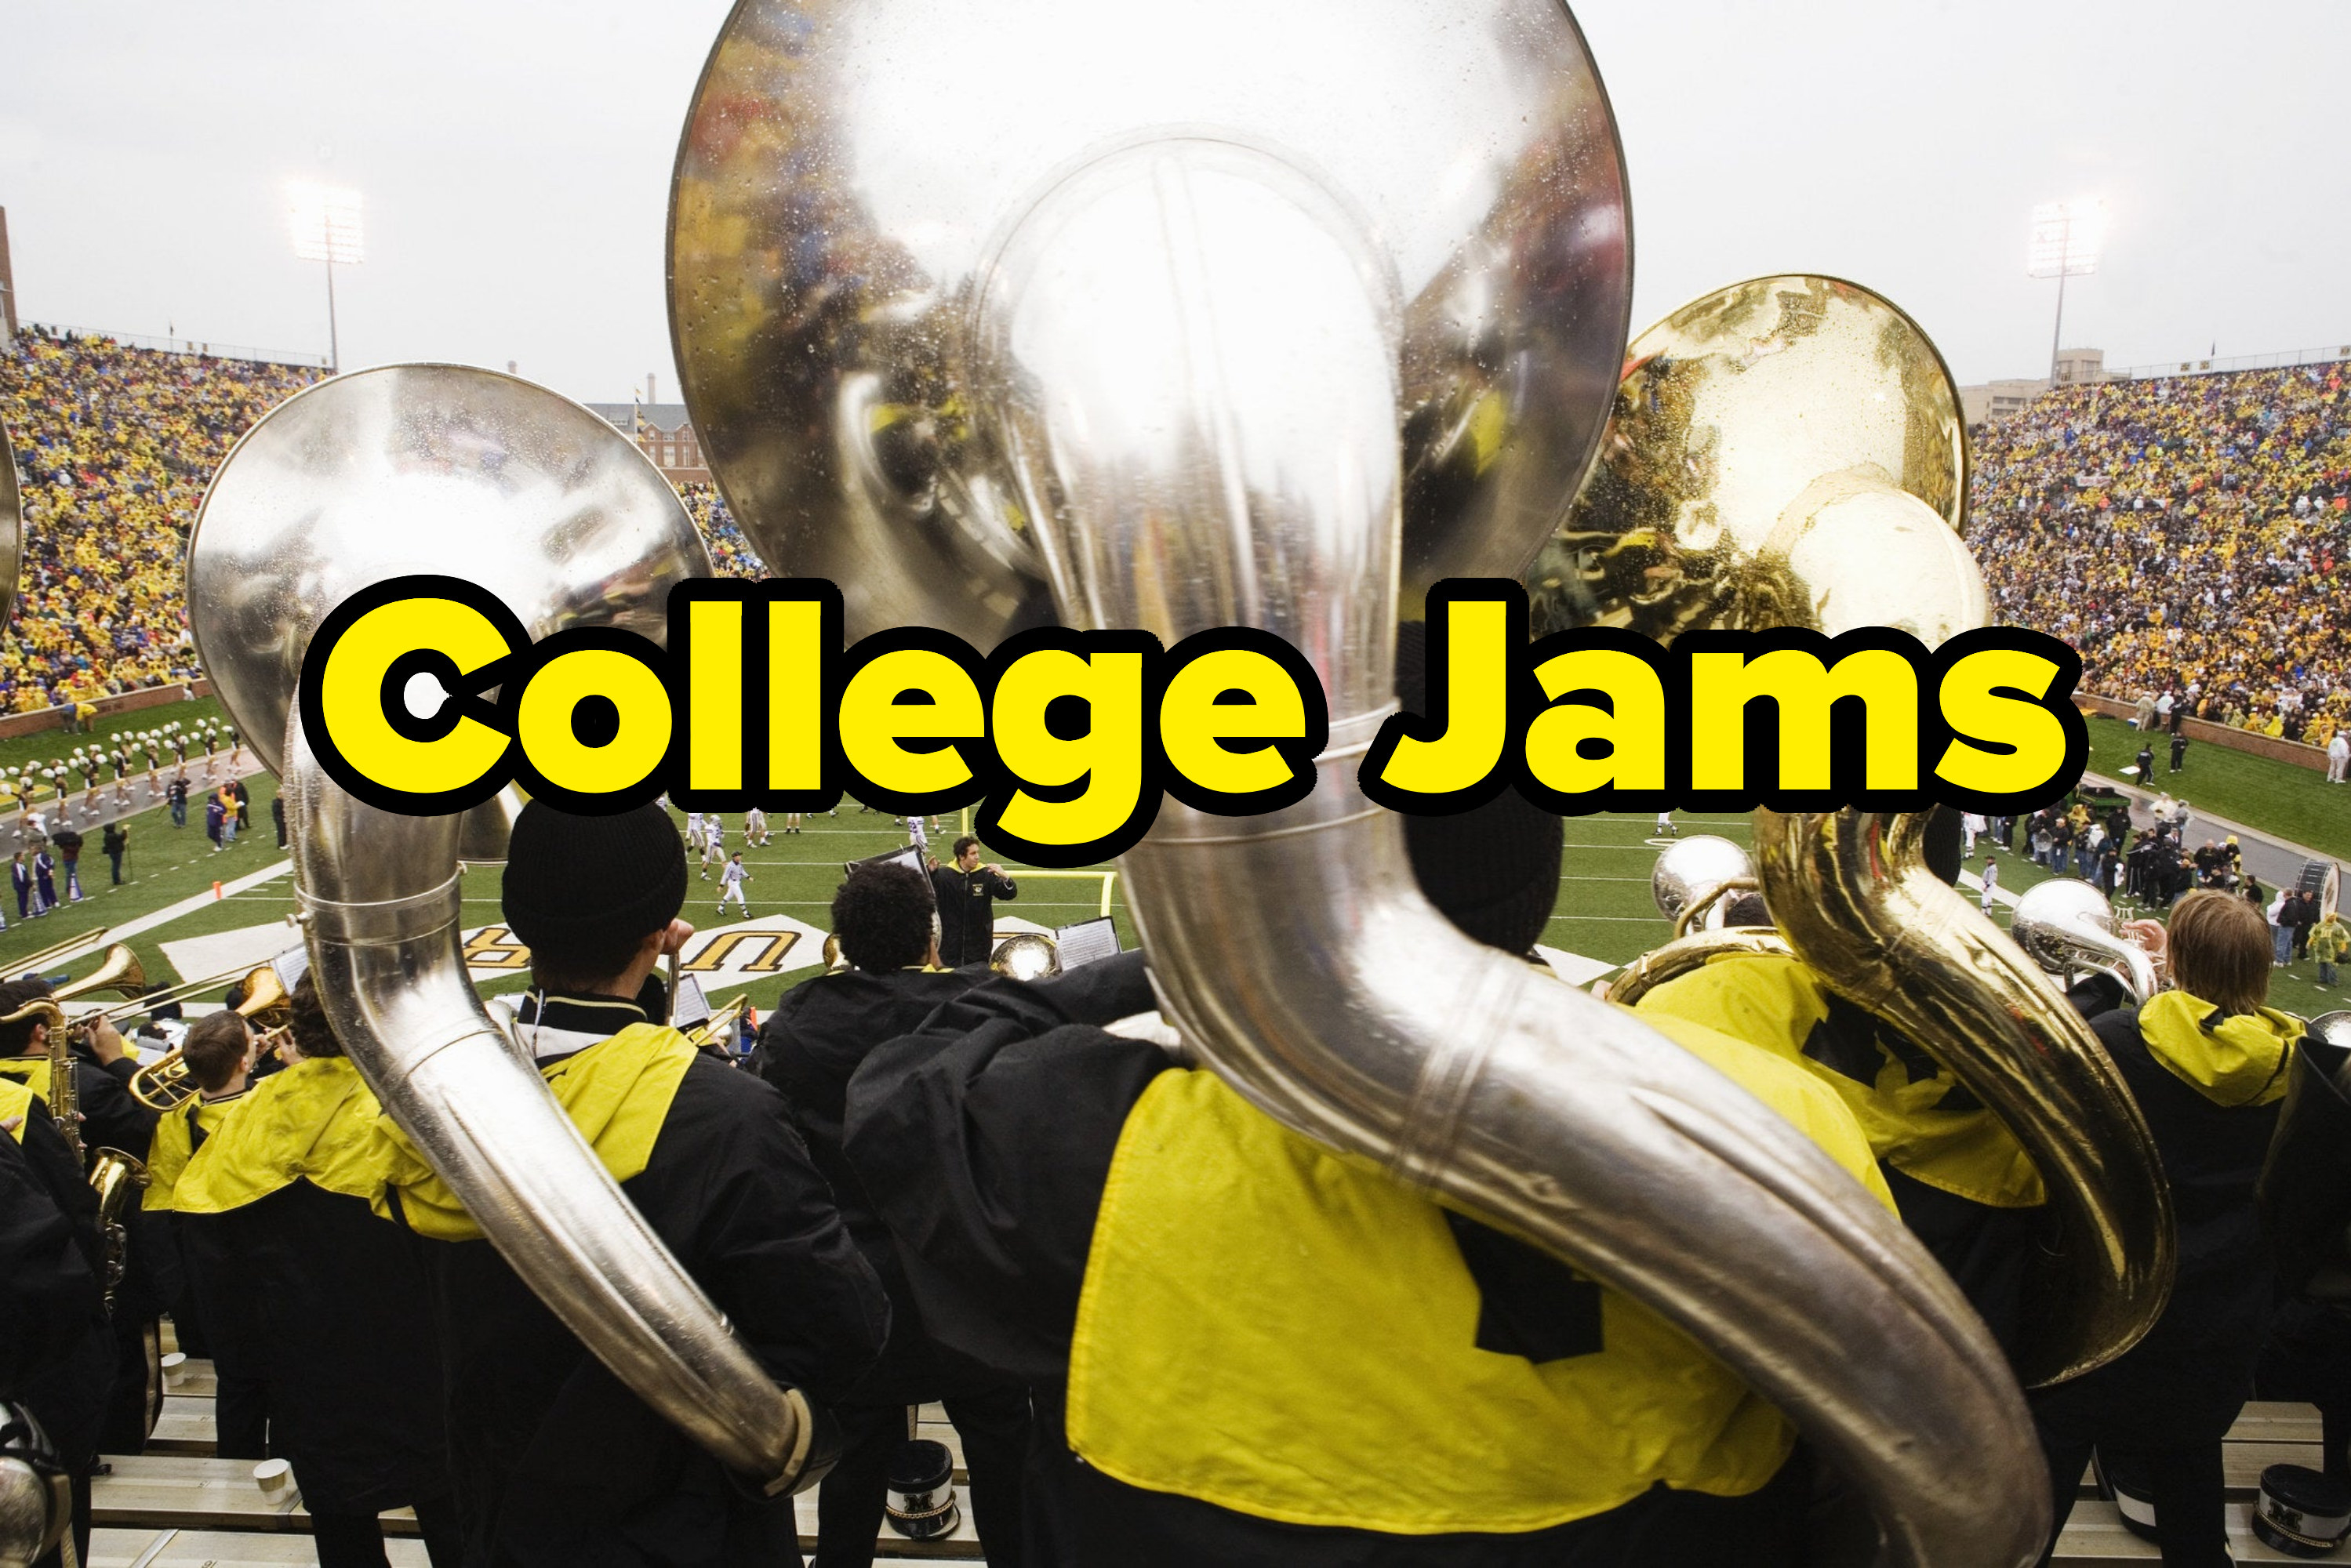 A college band on the side of a football game